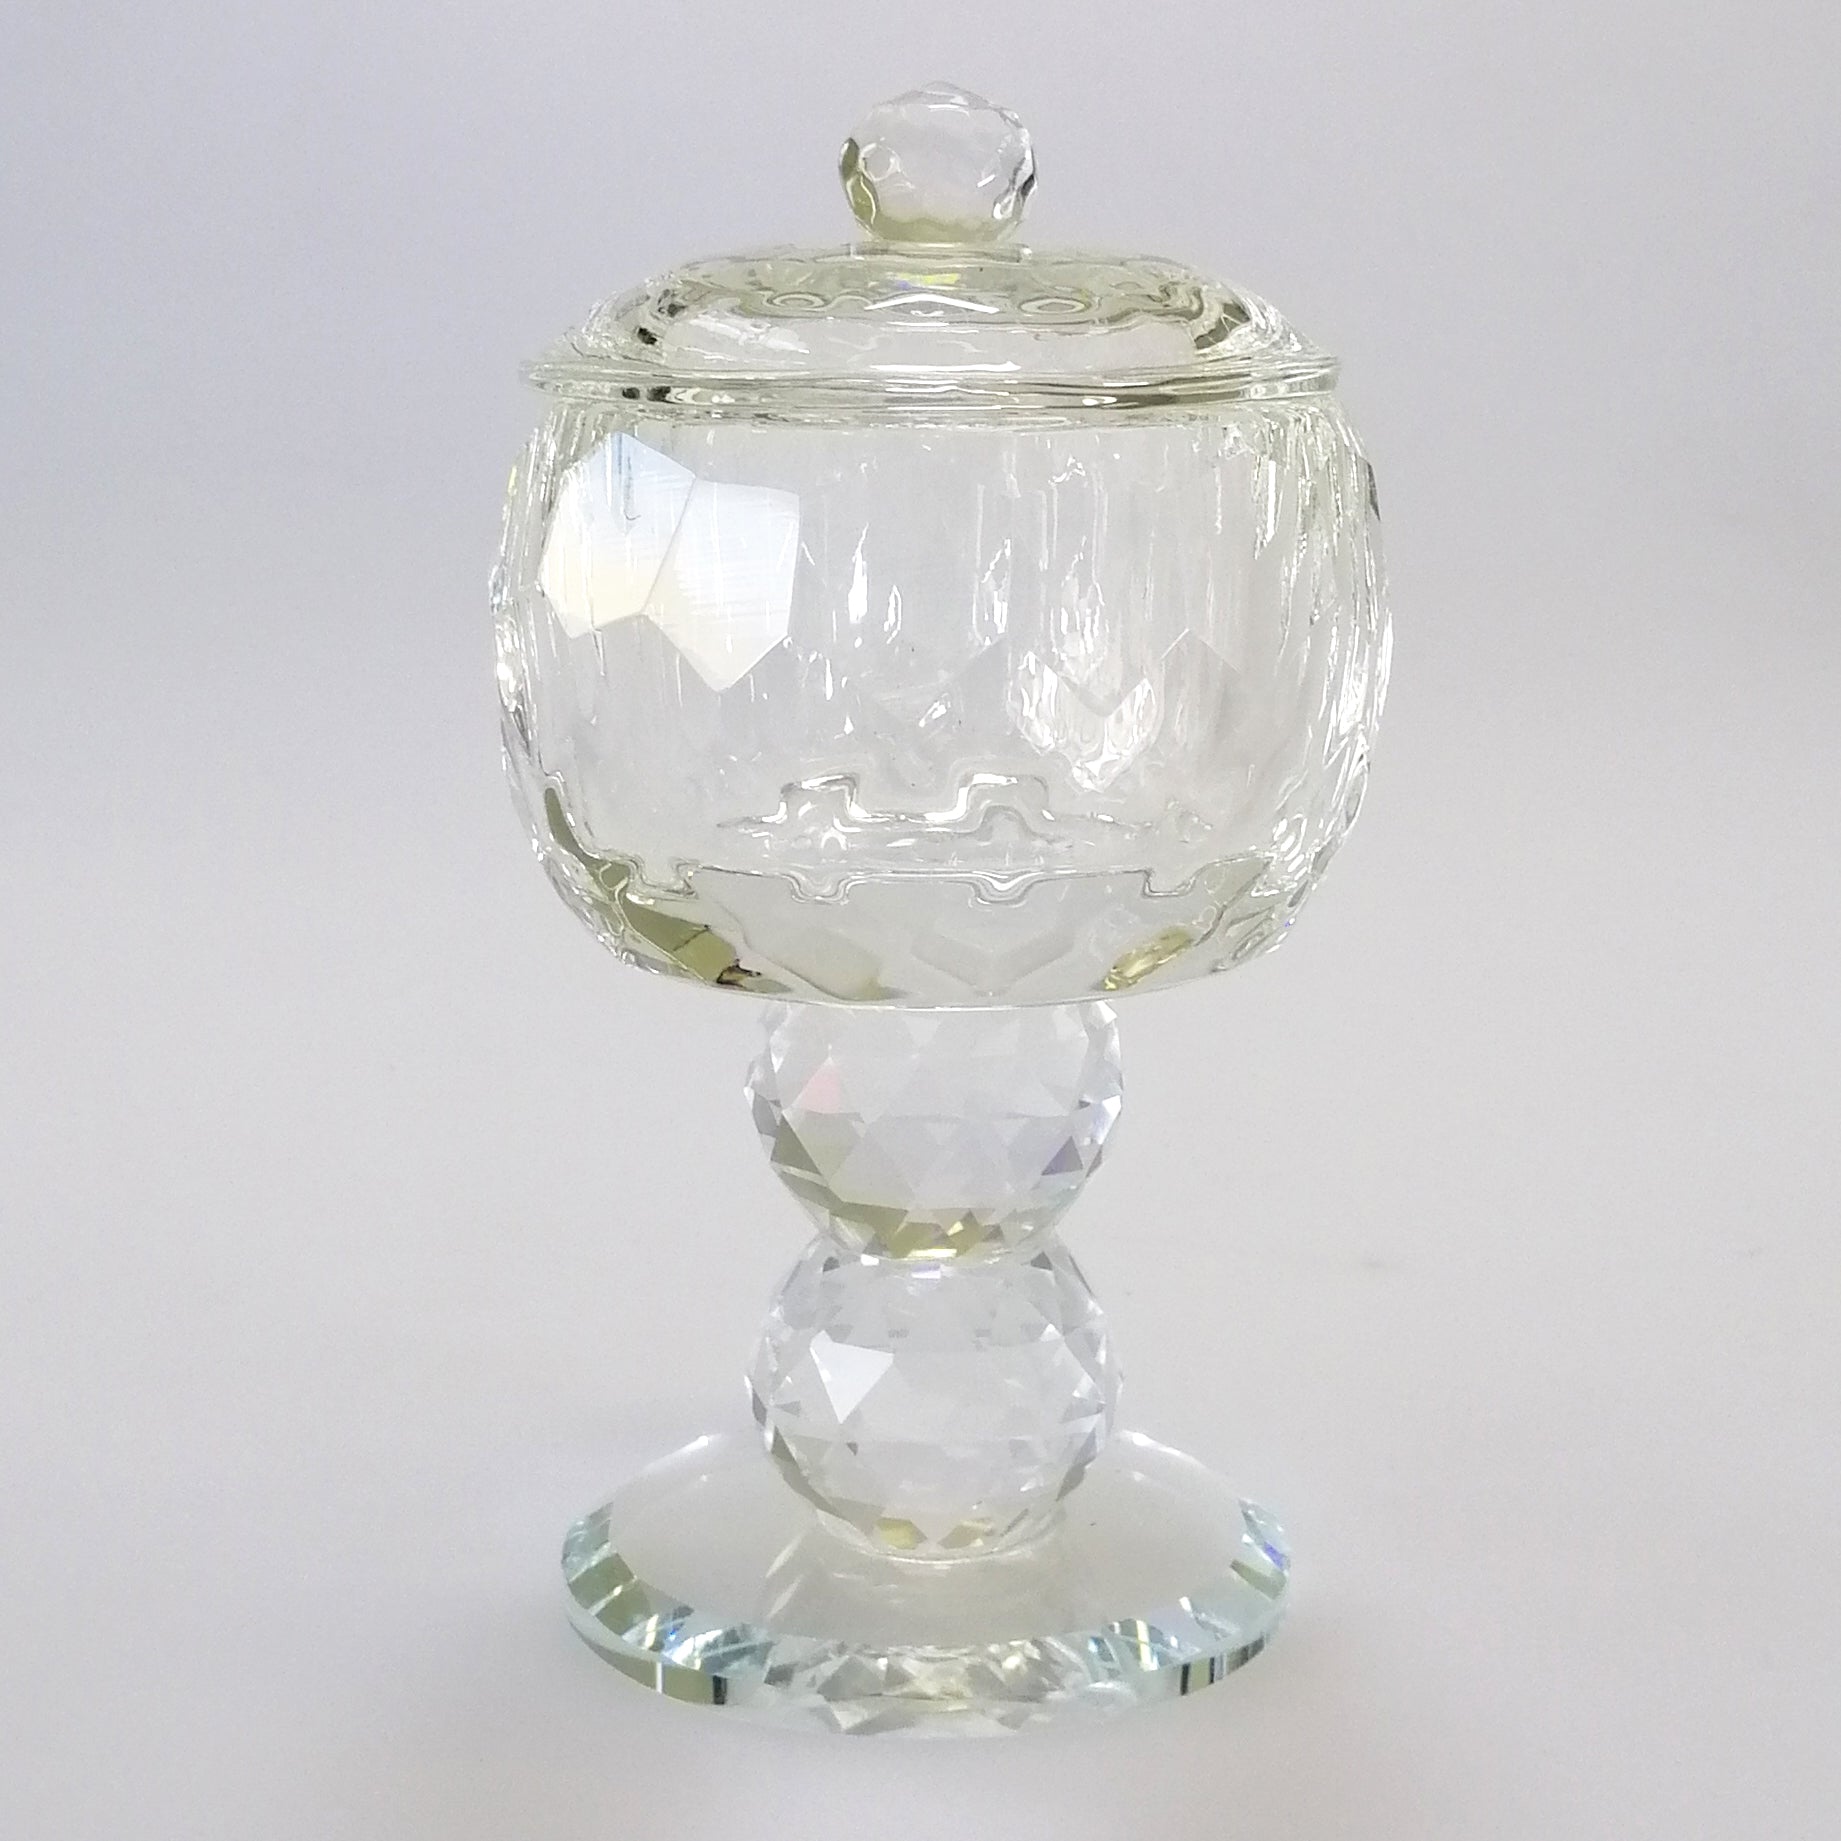 Small Cut Glass Standing Canister with Lid